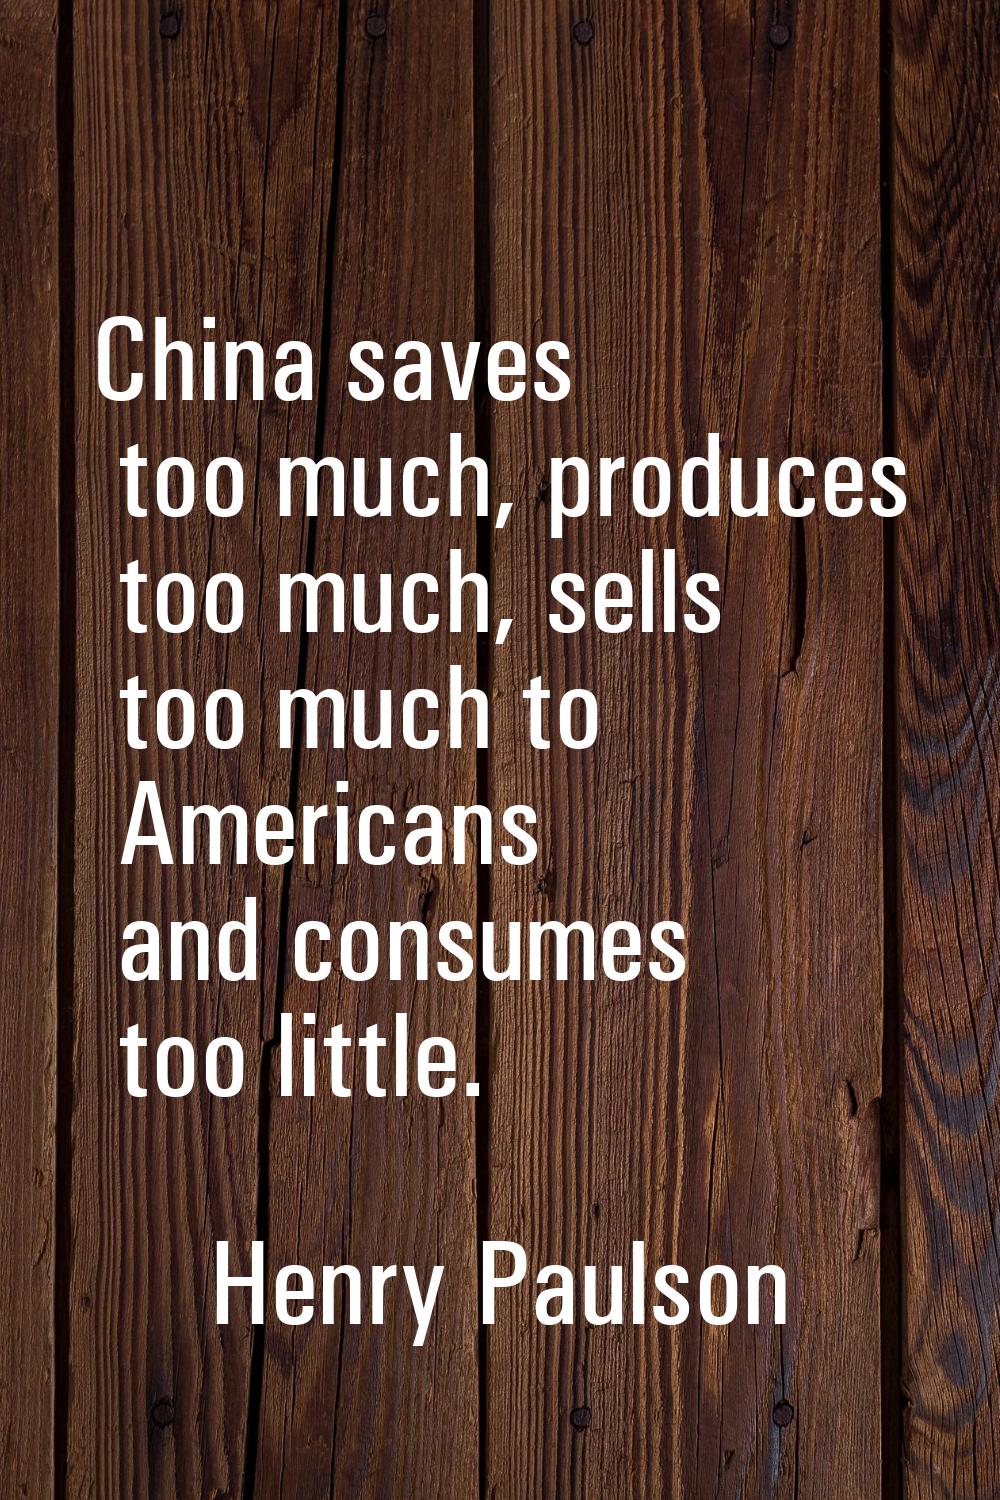 China saves too much, produces too much, sells too much to Americans and consumes too little.